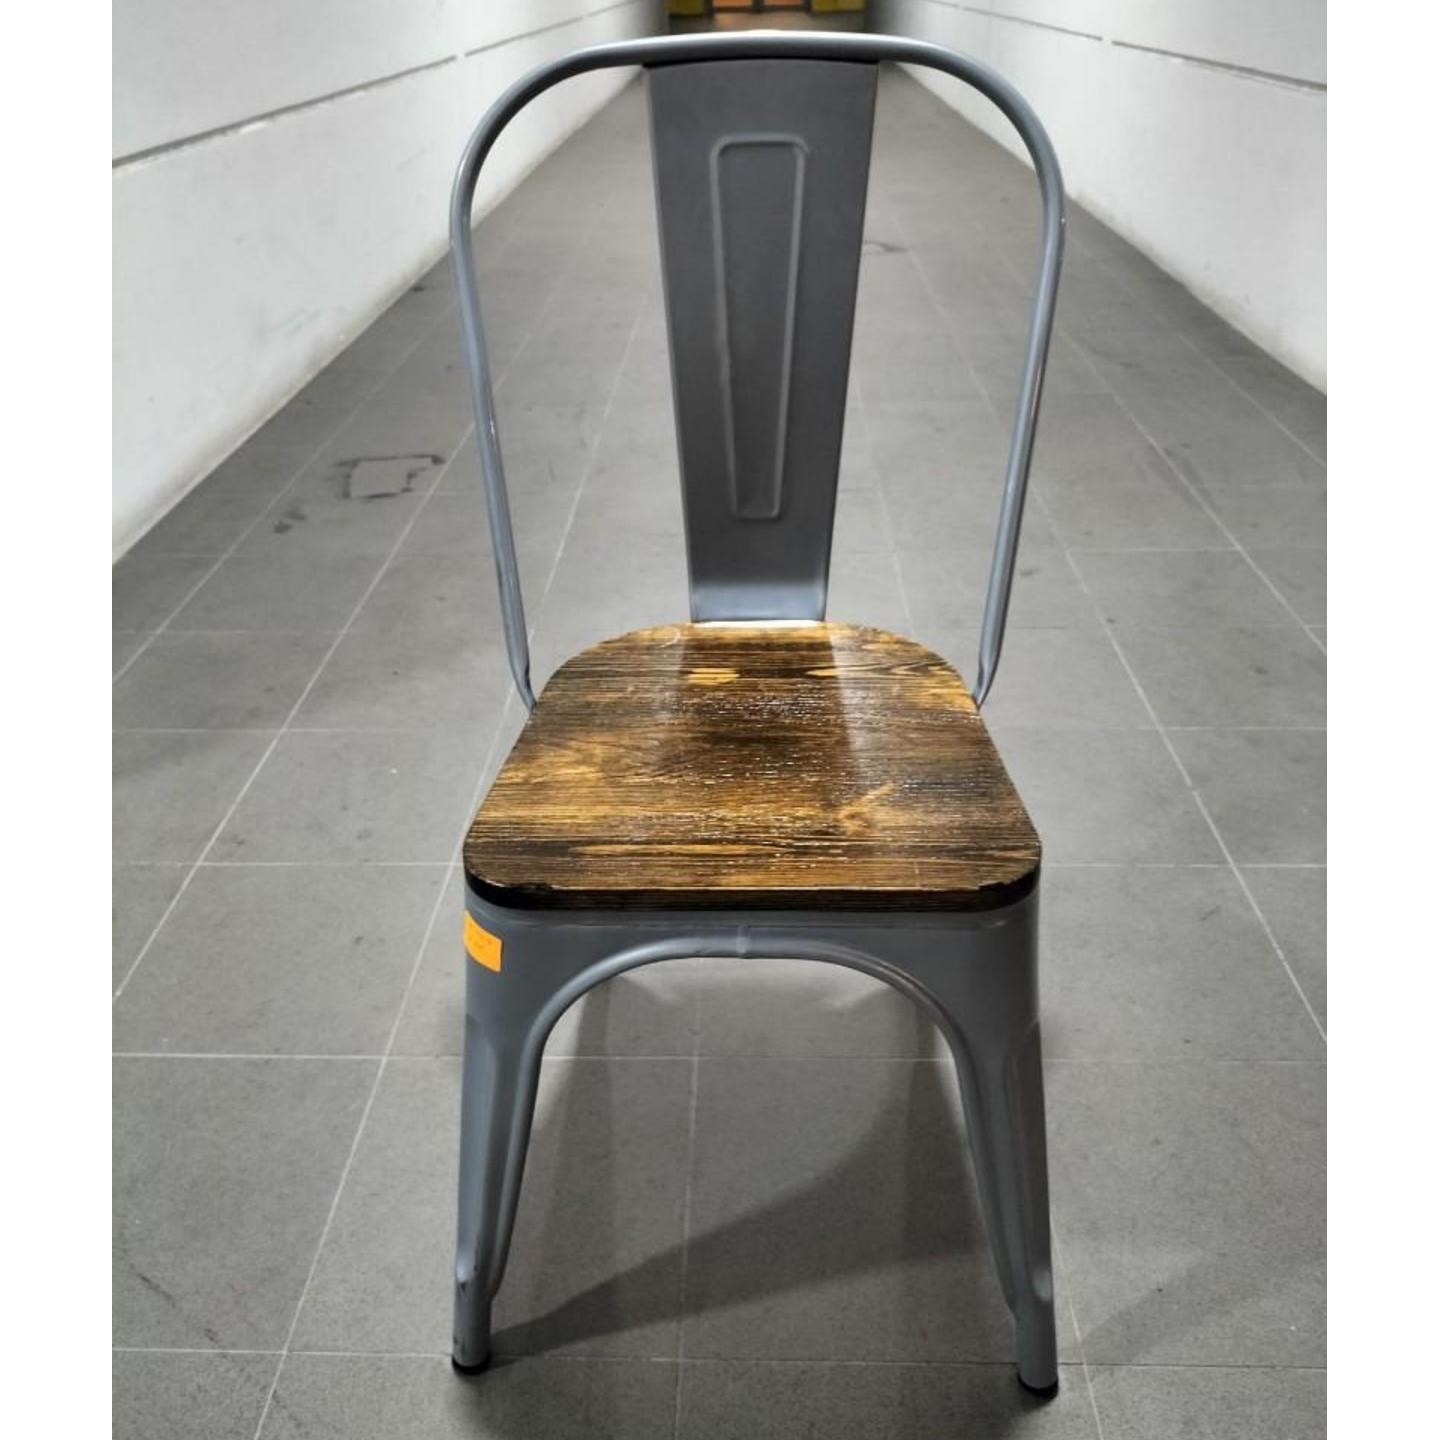 VADO Retrol Metal Chair in SILVER with Wooden Top